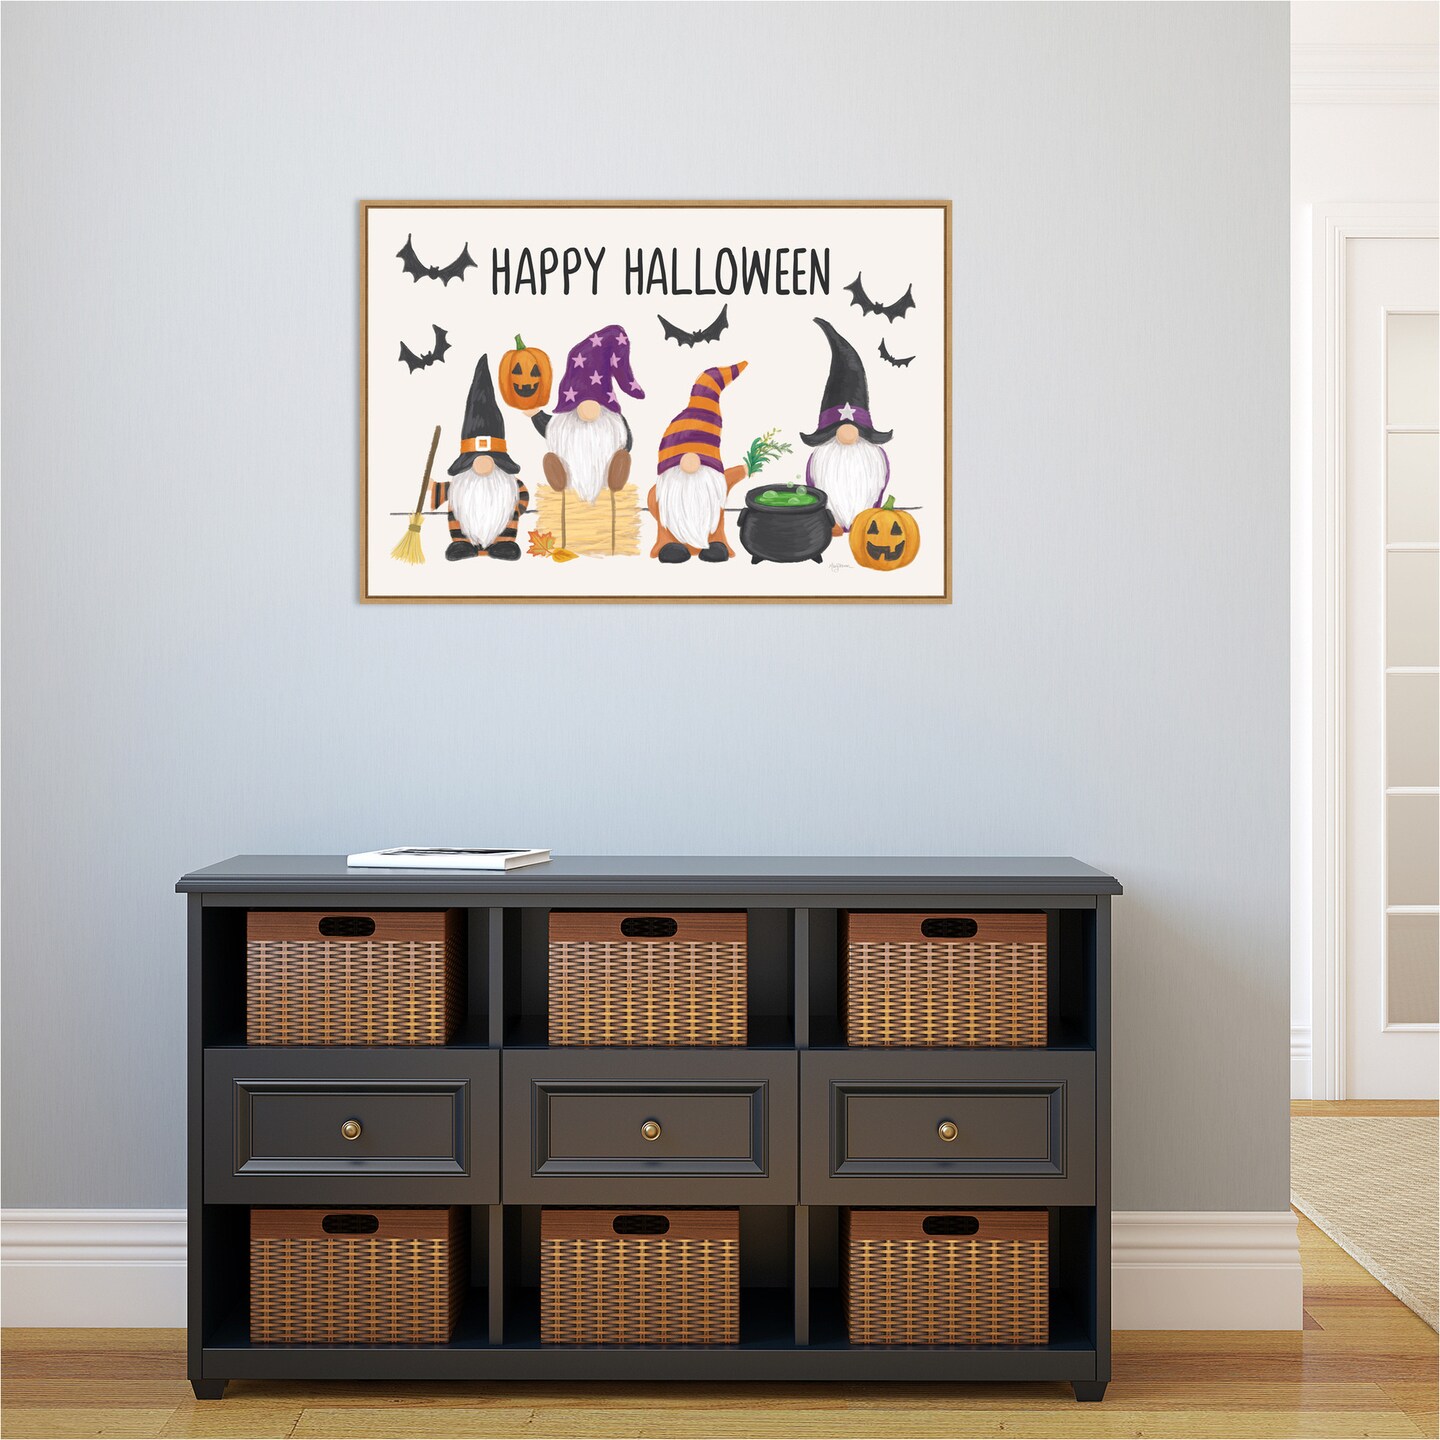 Halloween Gnomes I by Mary Urban 33-in. W x 23-in. H. Canvas Wall Art Print Framed in Natural